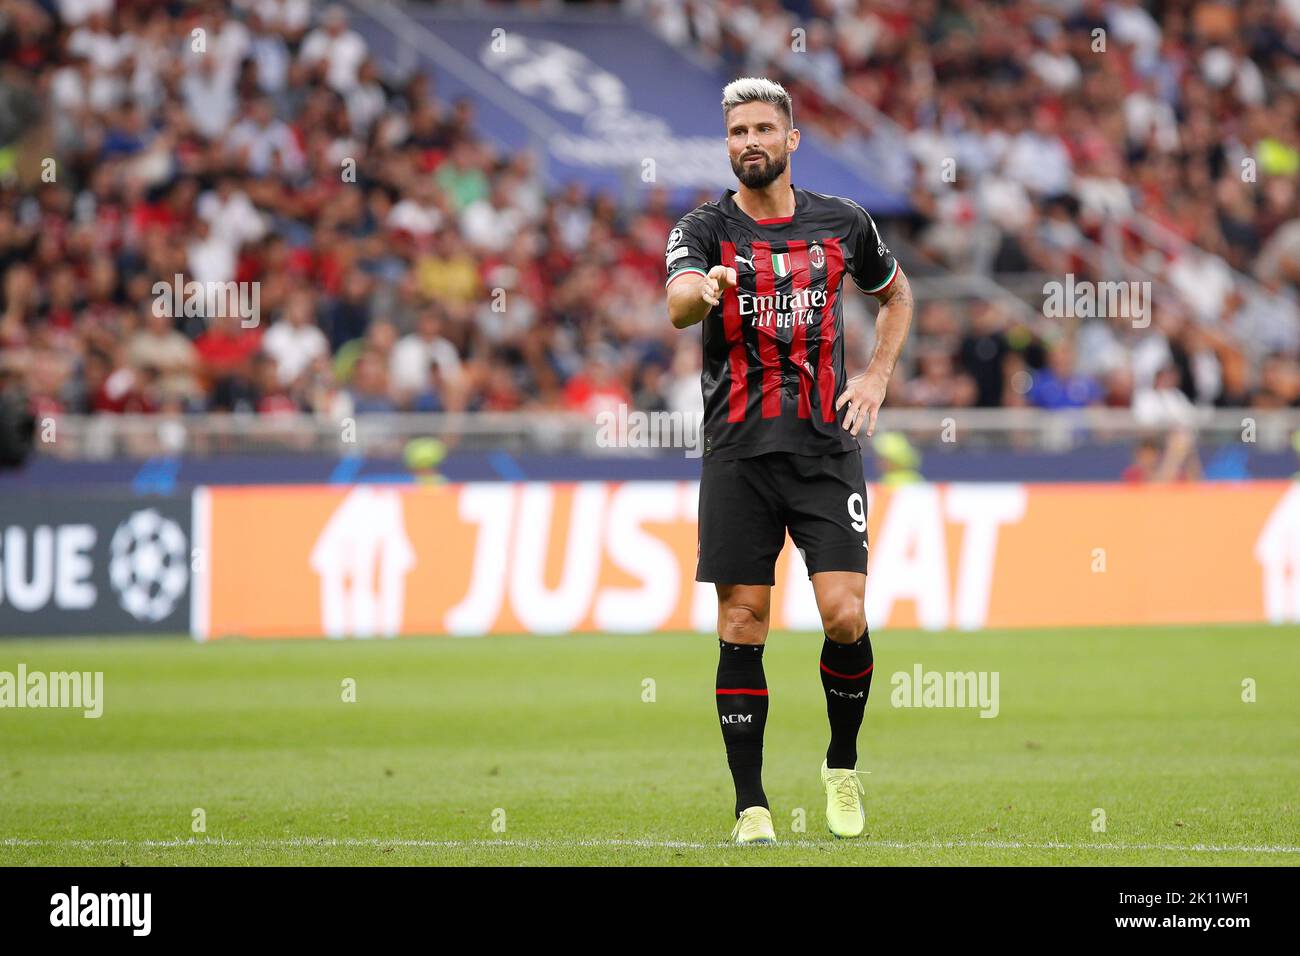 Milan, Italy. 14th Sep, 2022. Italy, Milan, sept 14 2022: Olivier Giroud (ac Milan striker) waiting for a goalkeeper-kick in the first half during soccer match AC MILAN vs DINAMO ZAGREB, UCL 2022-2023 matchday2 San Siro stadium (Photo by Fabrizio Andrea Bertani/Pacific Press) Credit: Pacific Press Media Production Corp./Alamy Live News Stock Photo